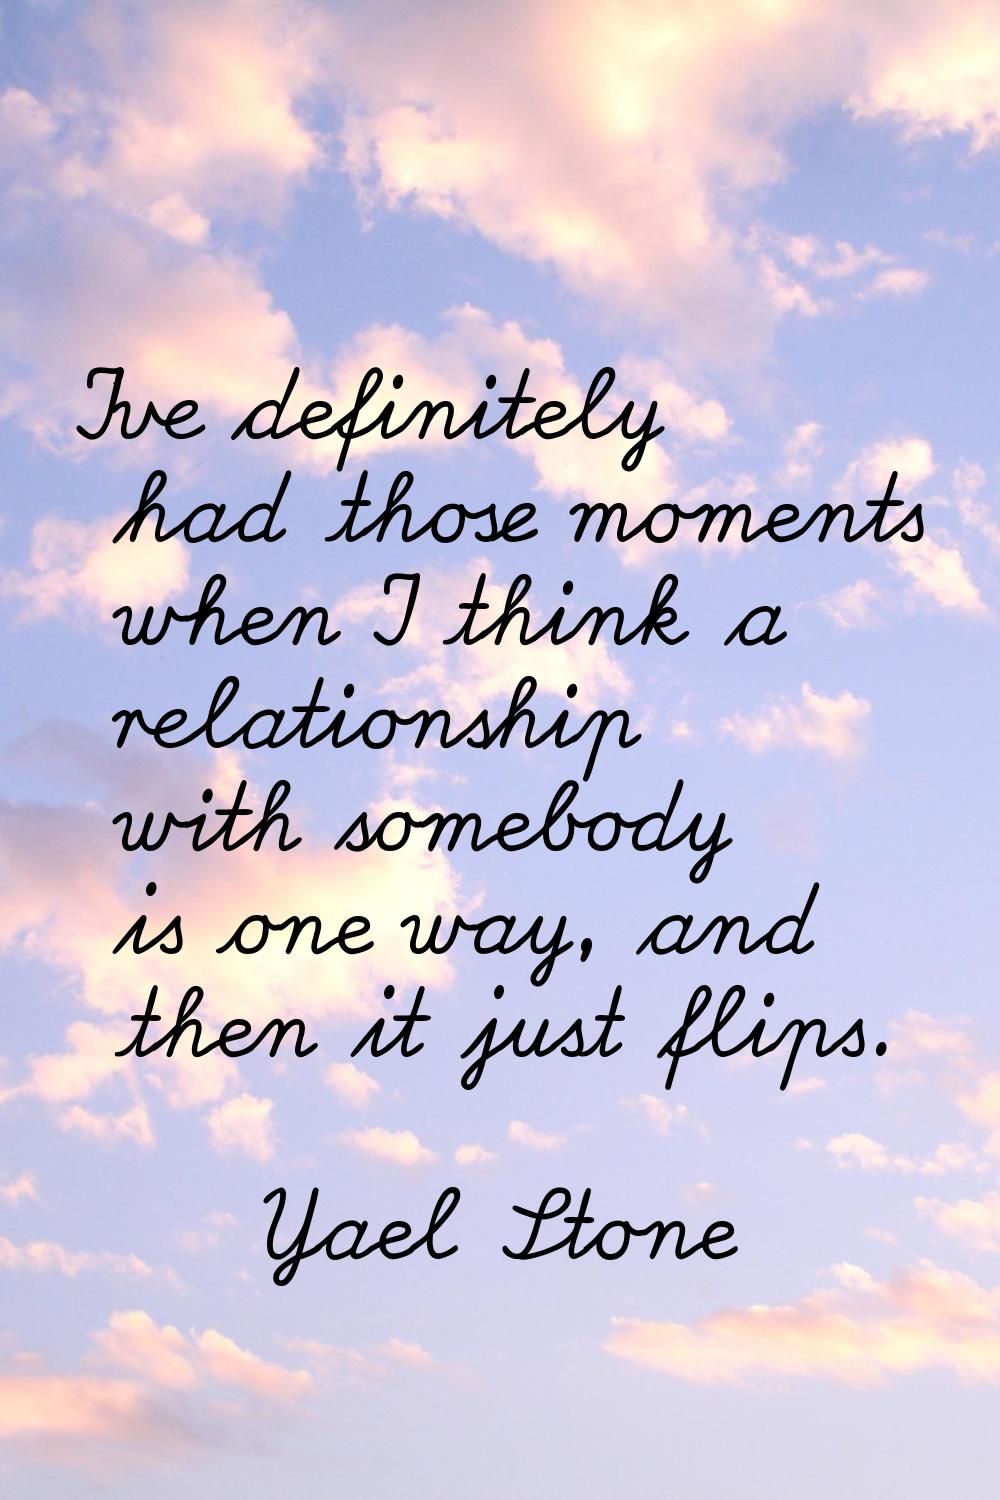 I've definitely had those moments when I think a relationship with somebody is one way, and then it